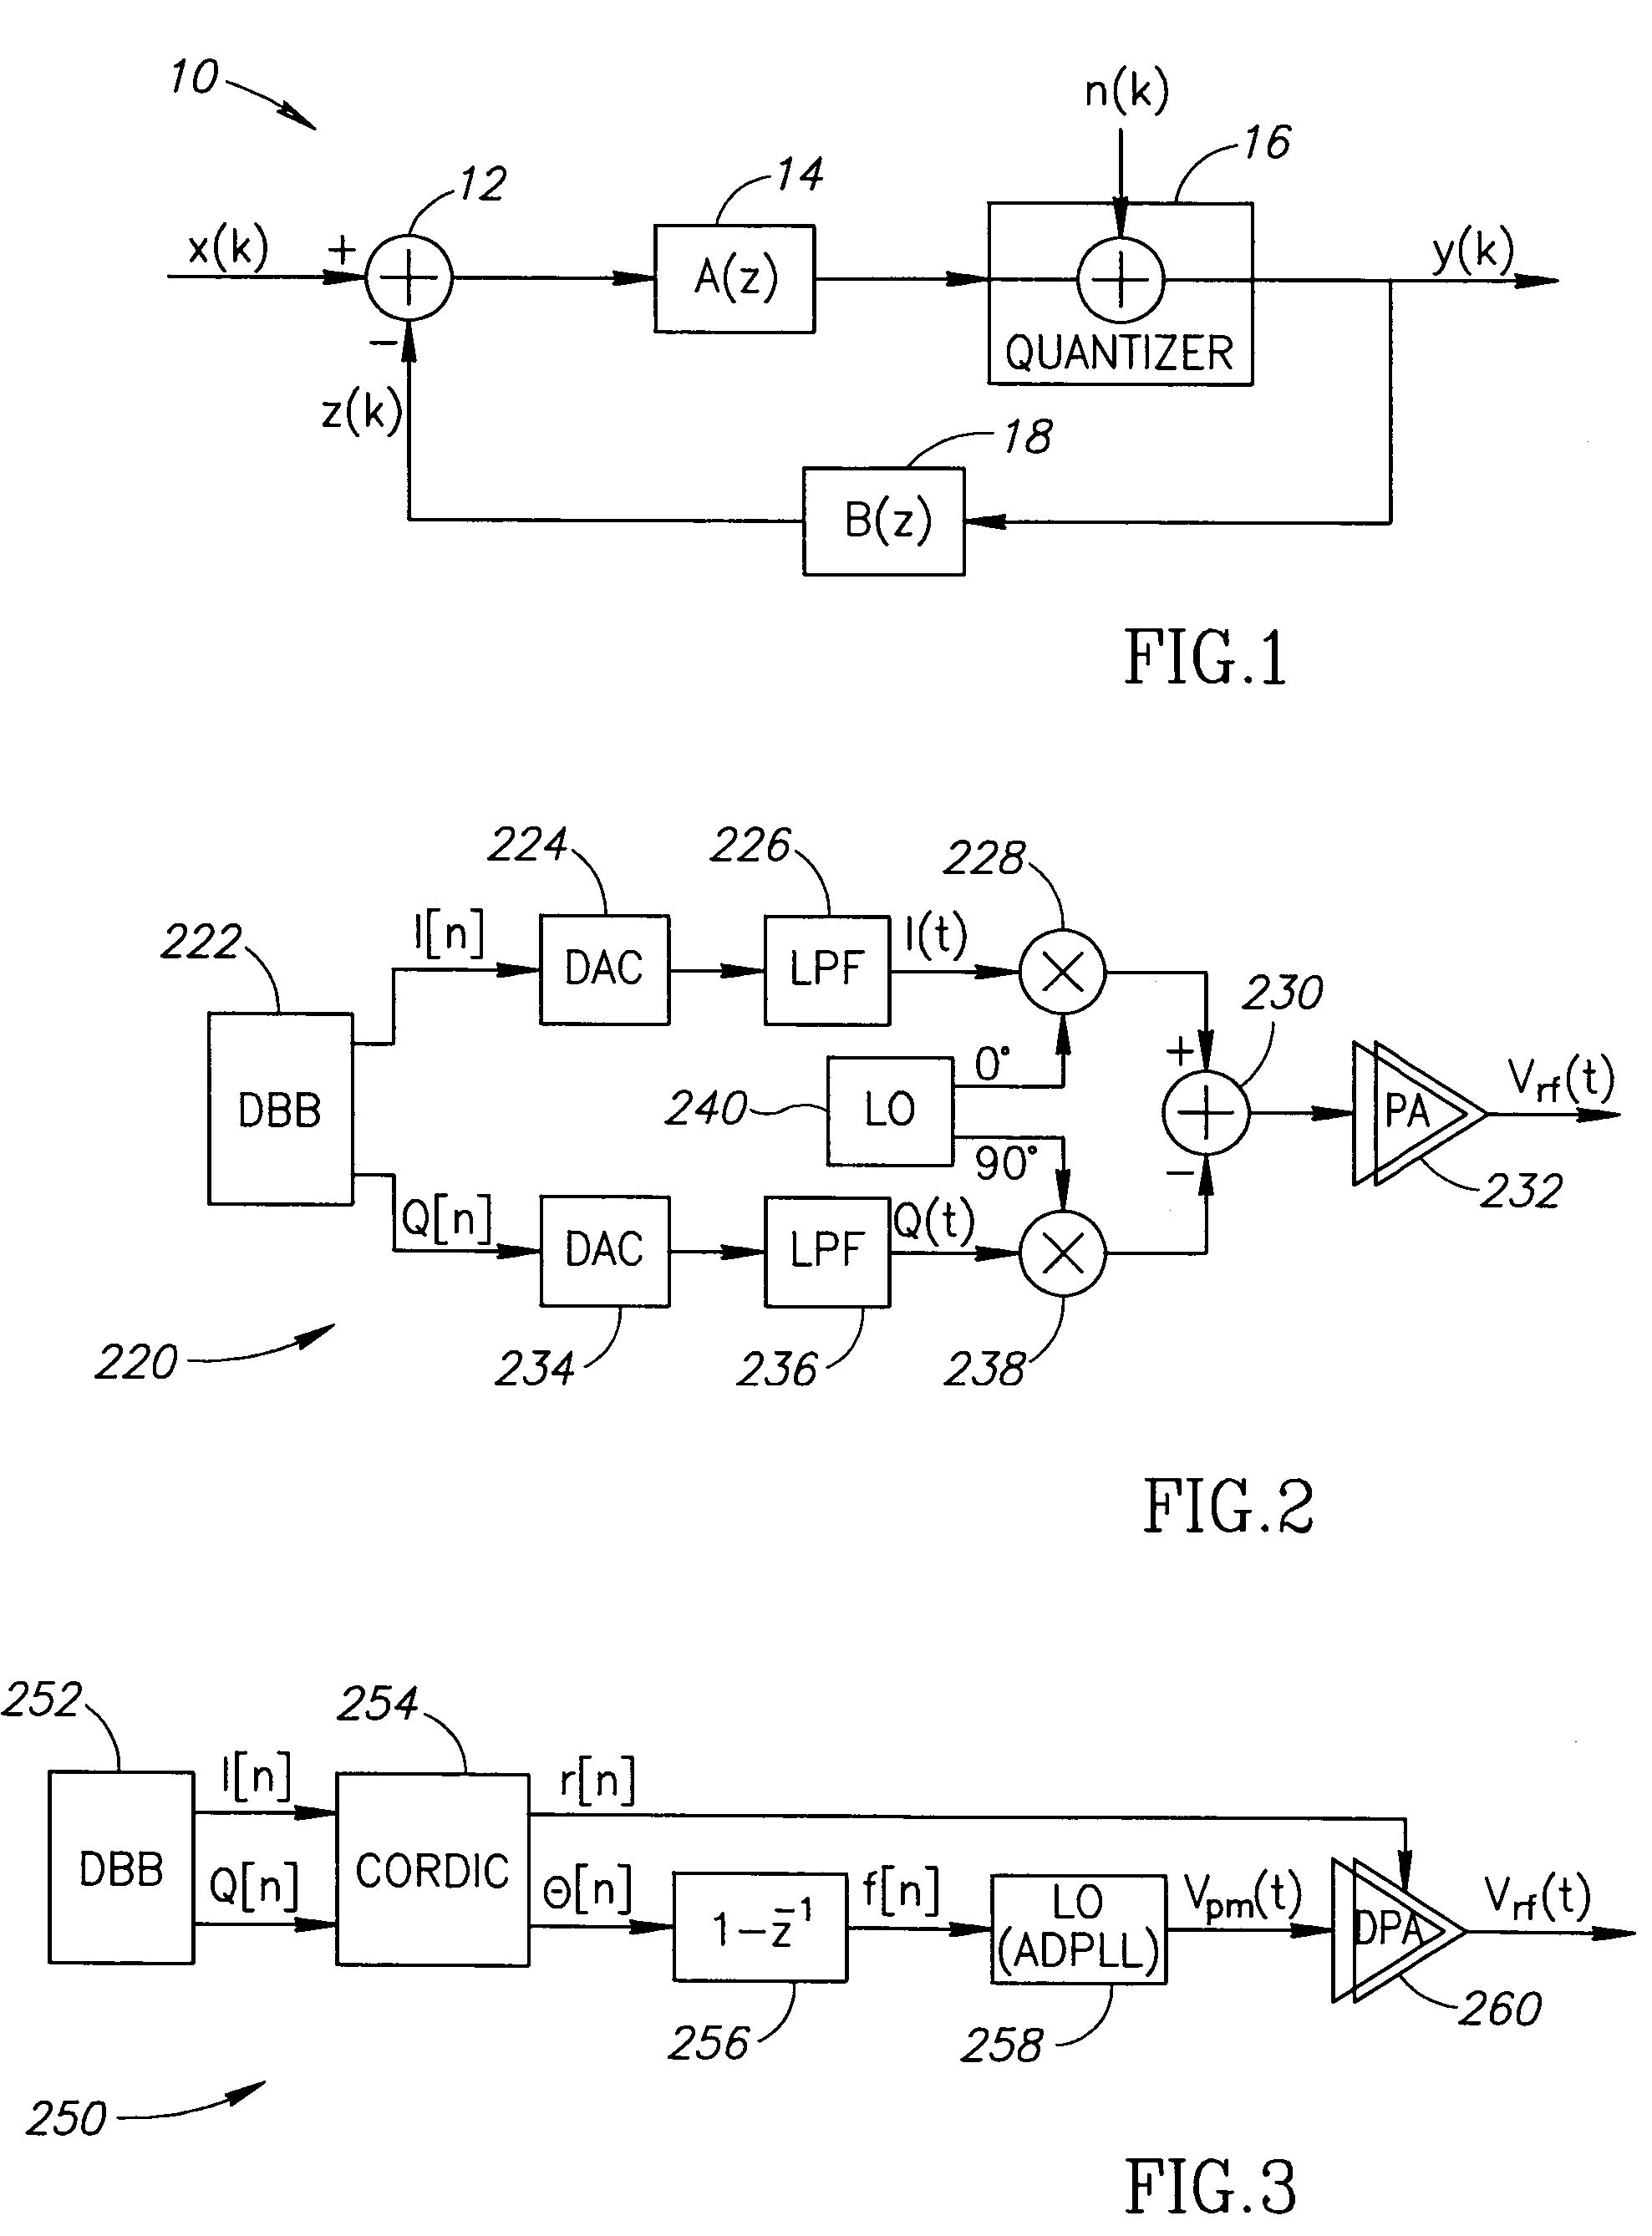 Transmitter for wireless applications incorporation spectral emission shaping sigma delta modulator